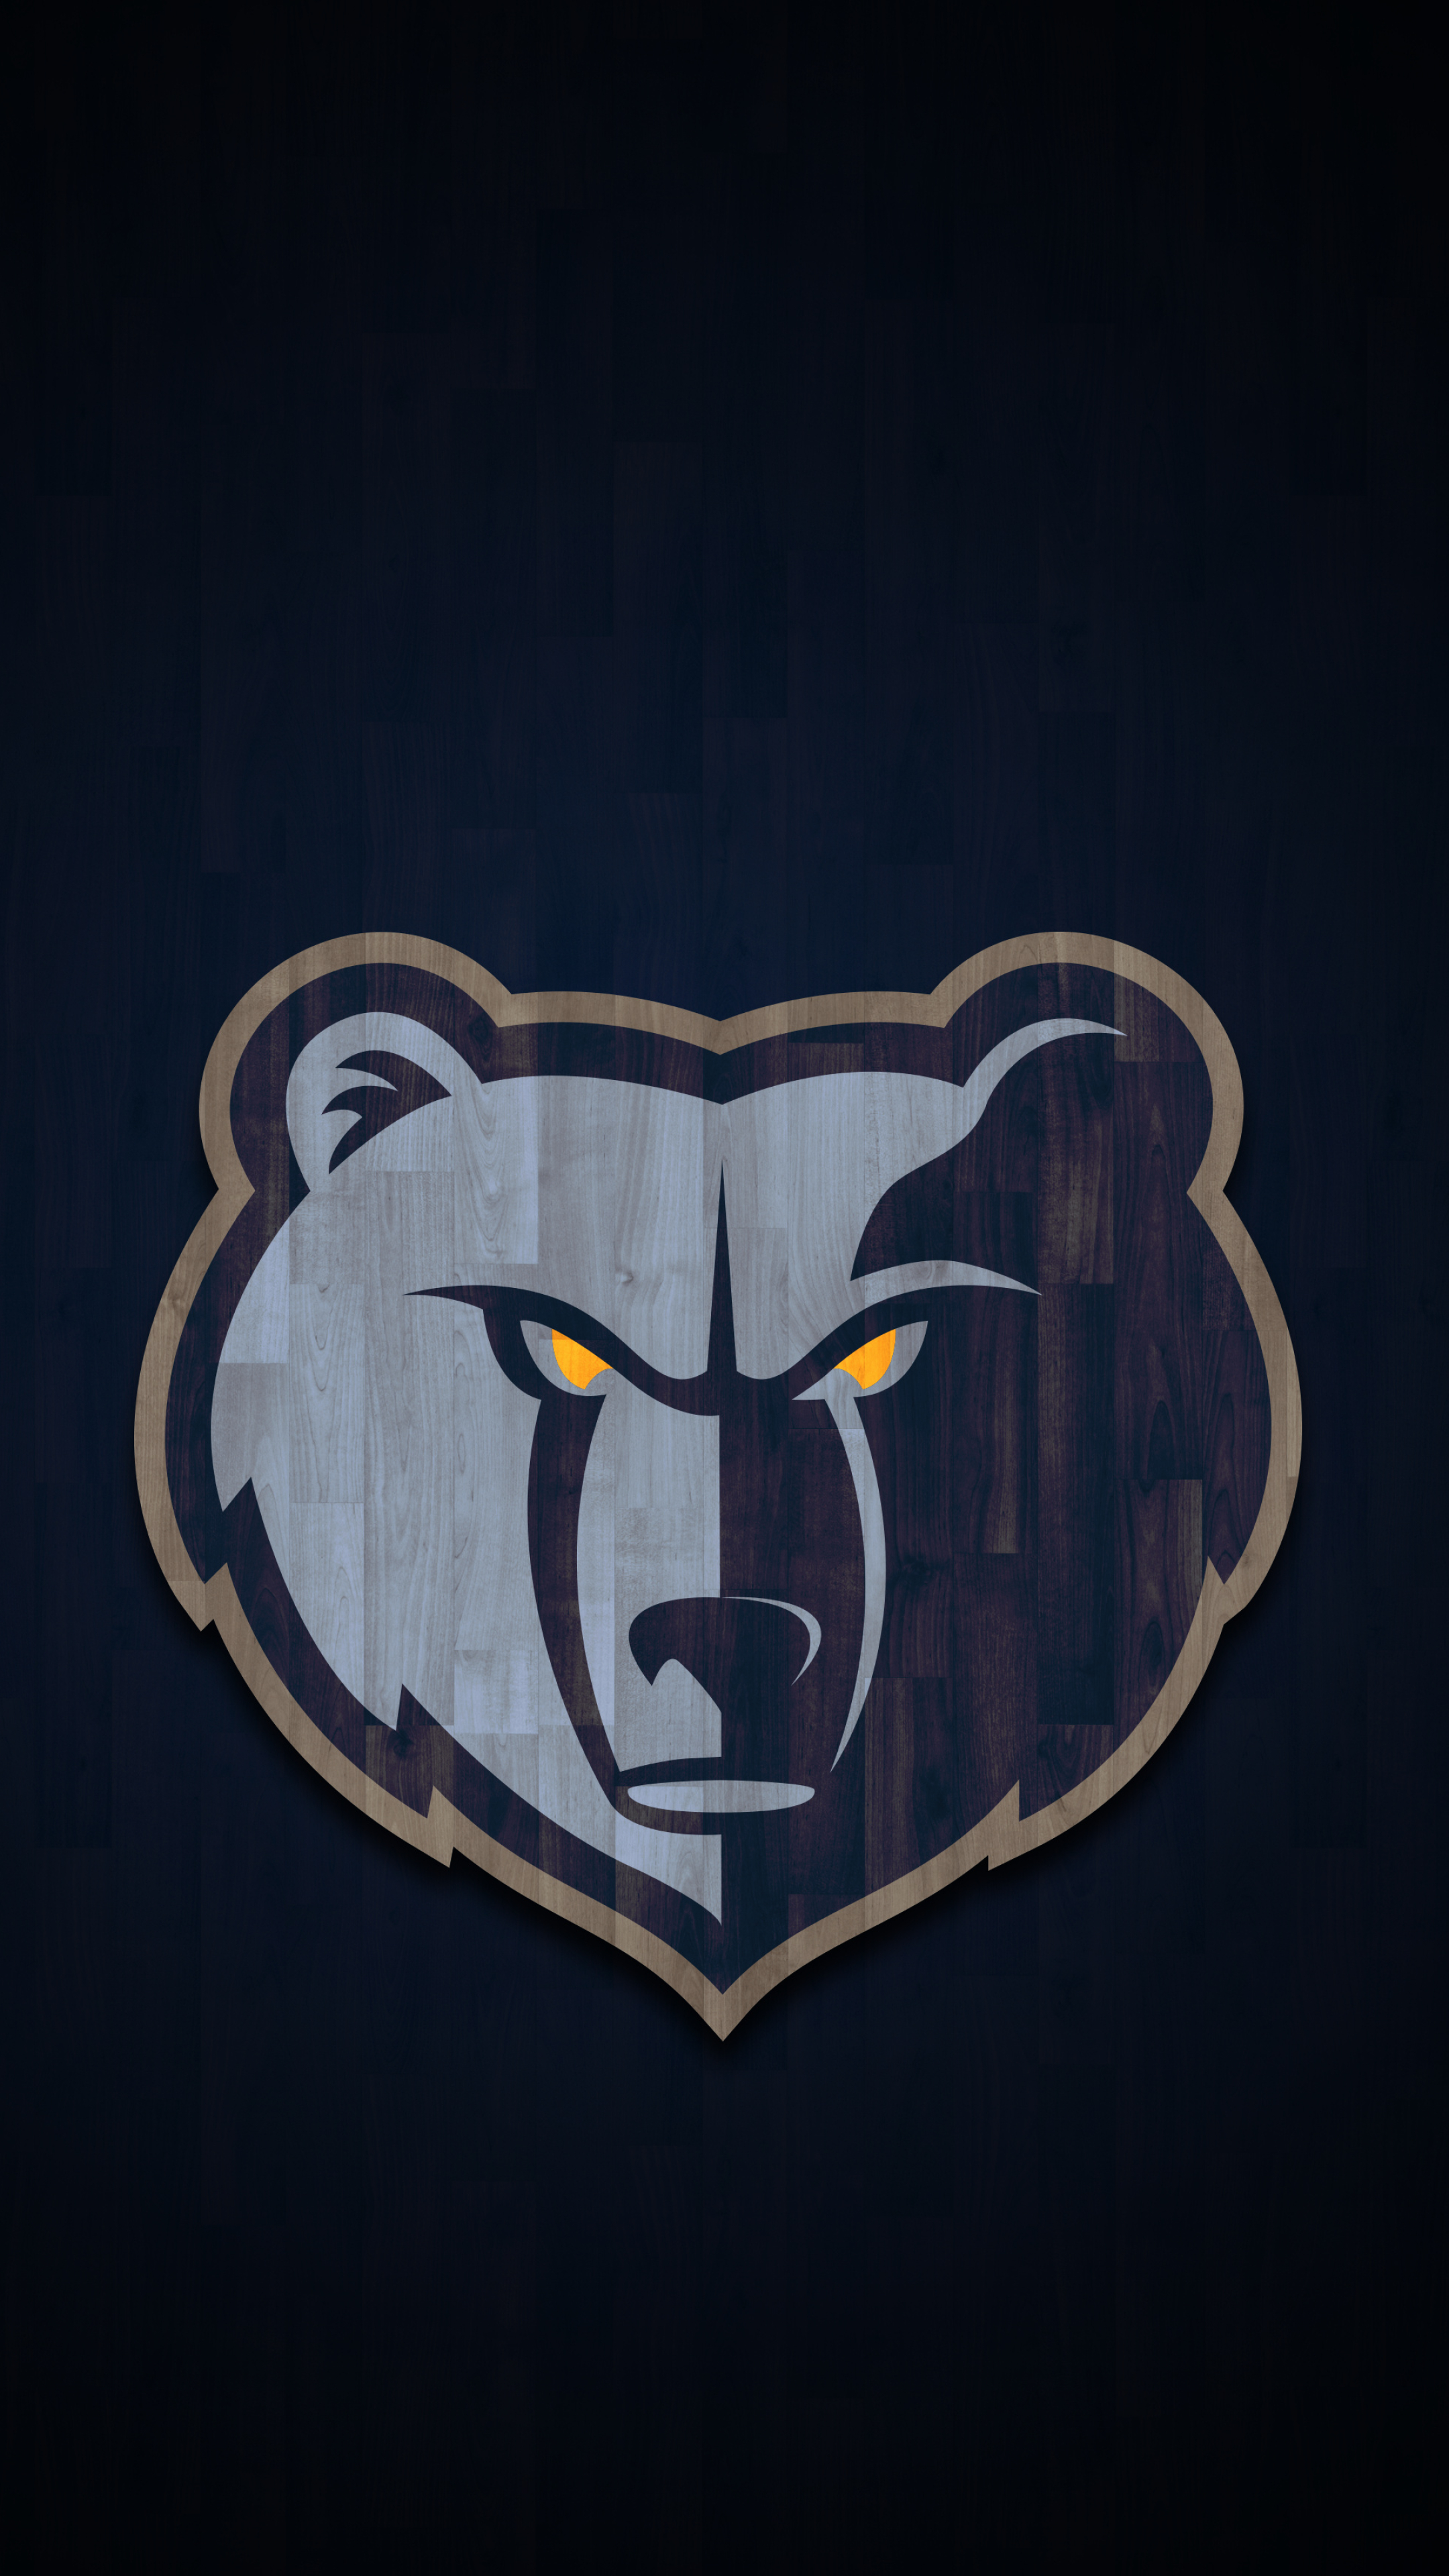 Memphis Grizzlies, 2022 wallpapers, Pro sports backgrounds, Basketball excitement, 2160x3840 4K Phone